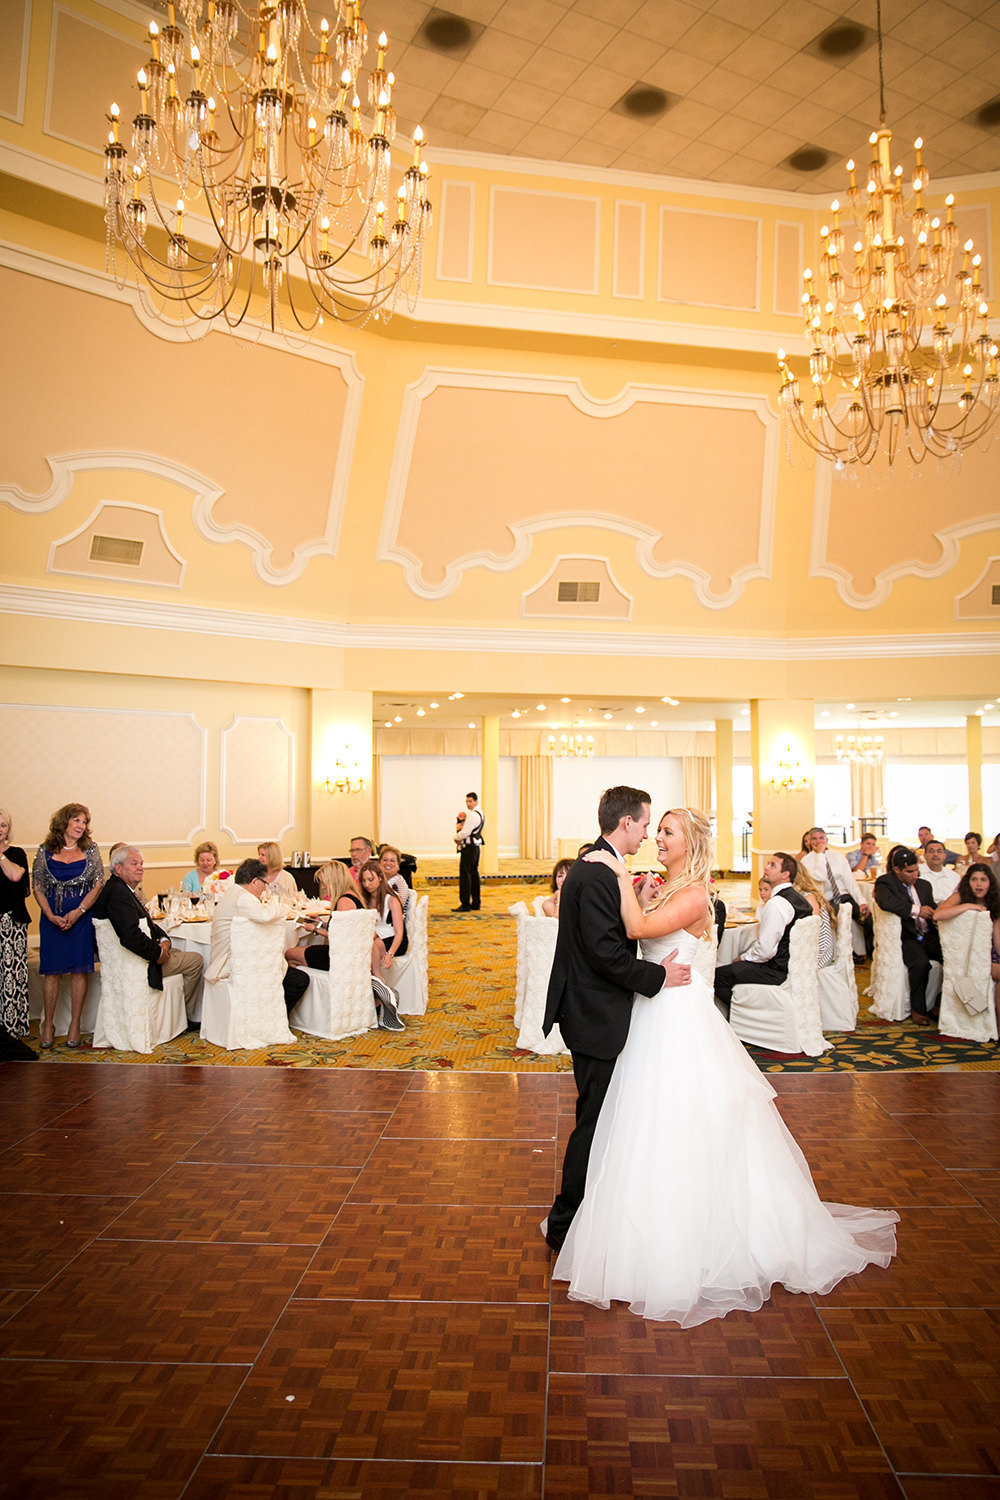 The chandeliers at the Hotel Del Coronado make such a romantic scene for the first dance.